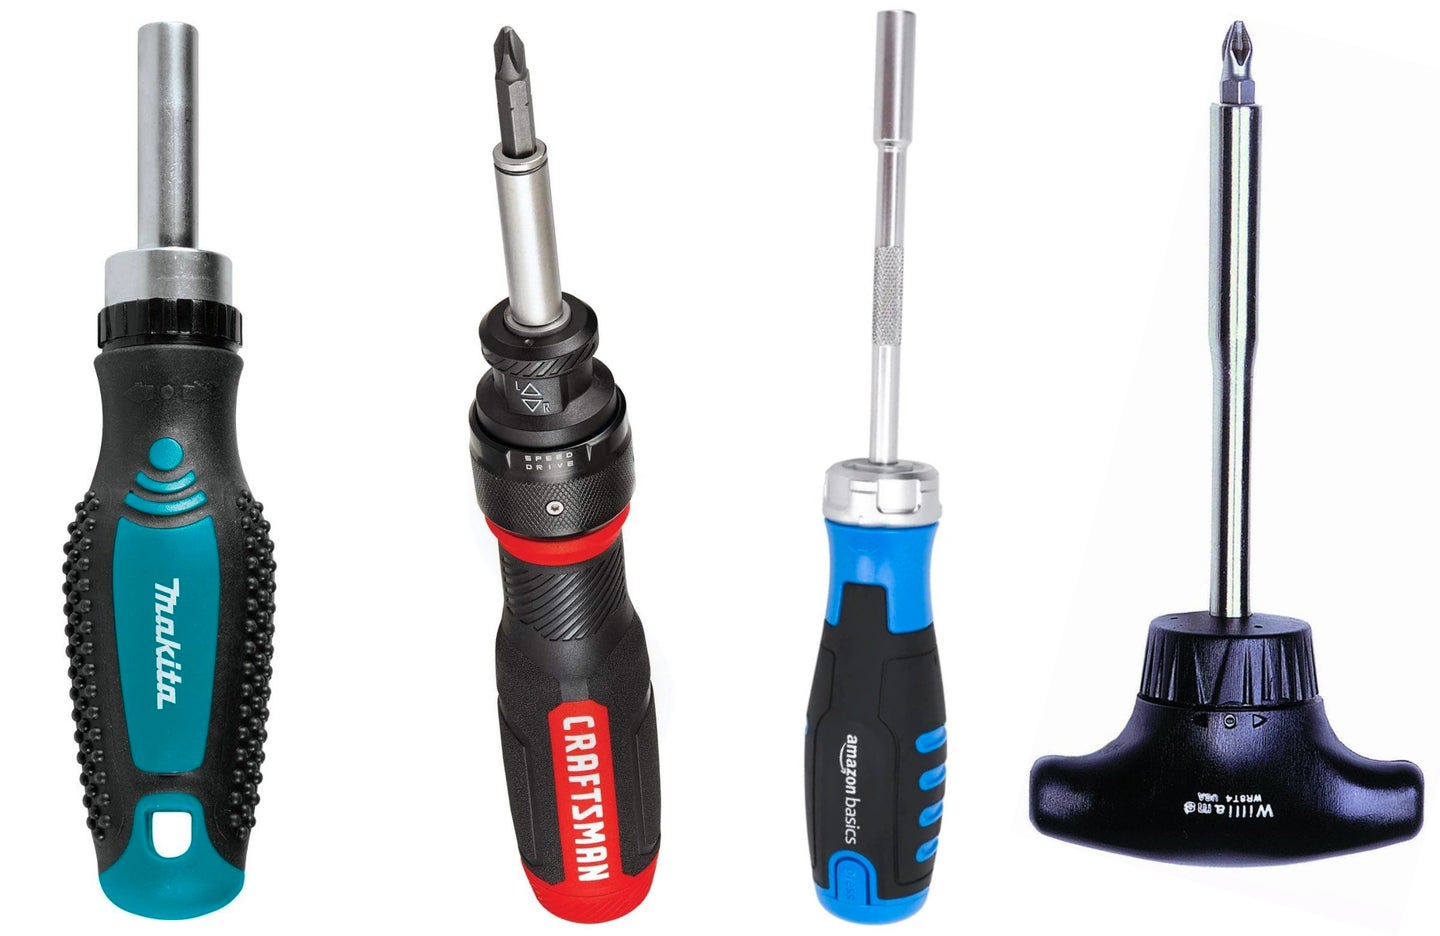 The best ratcheting screwdrivers